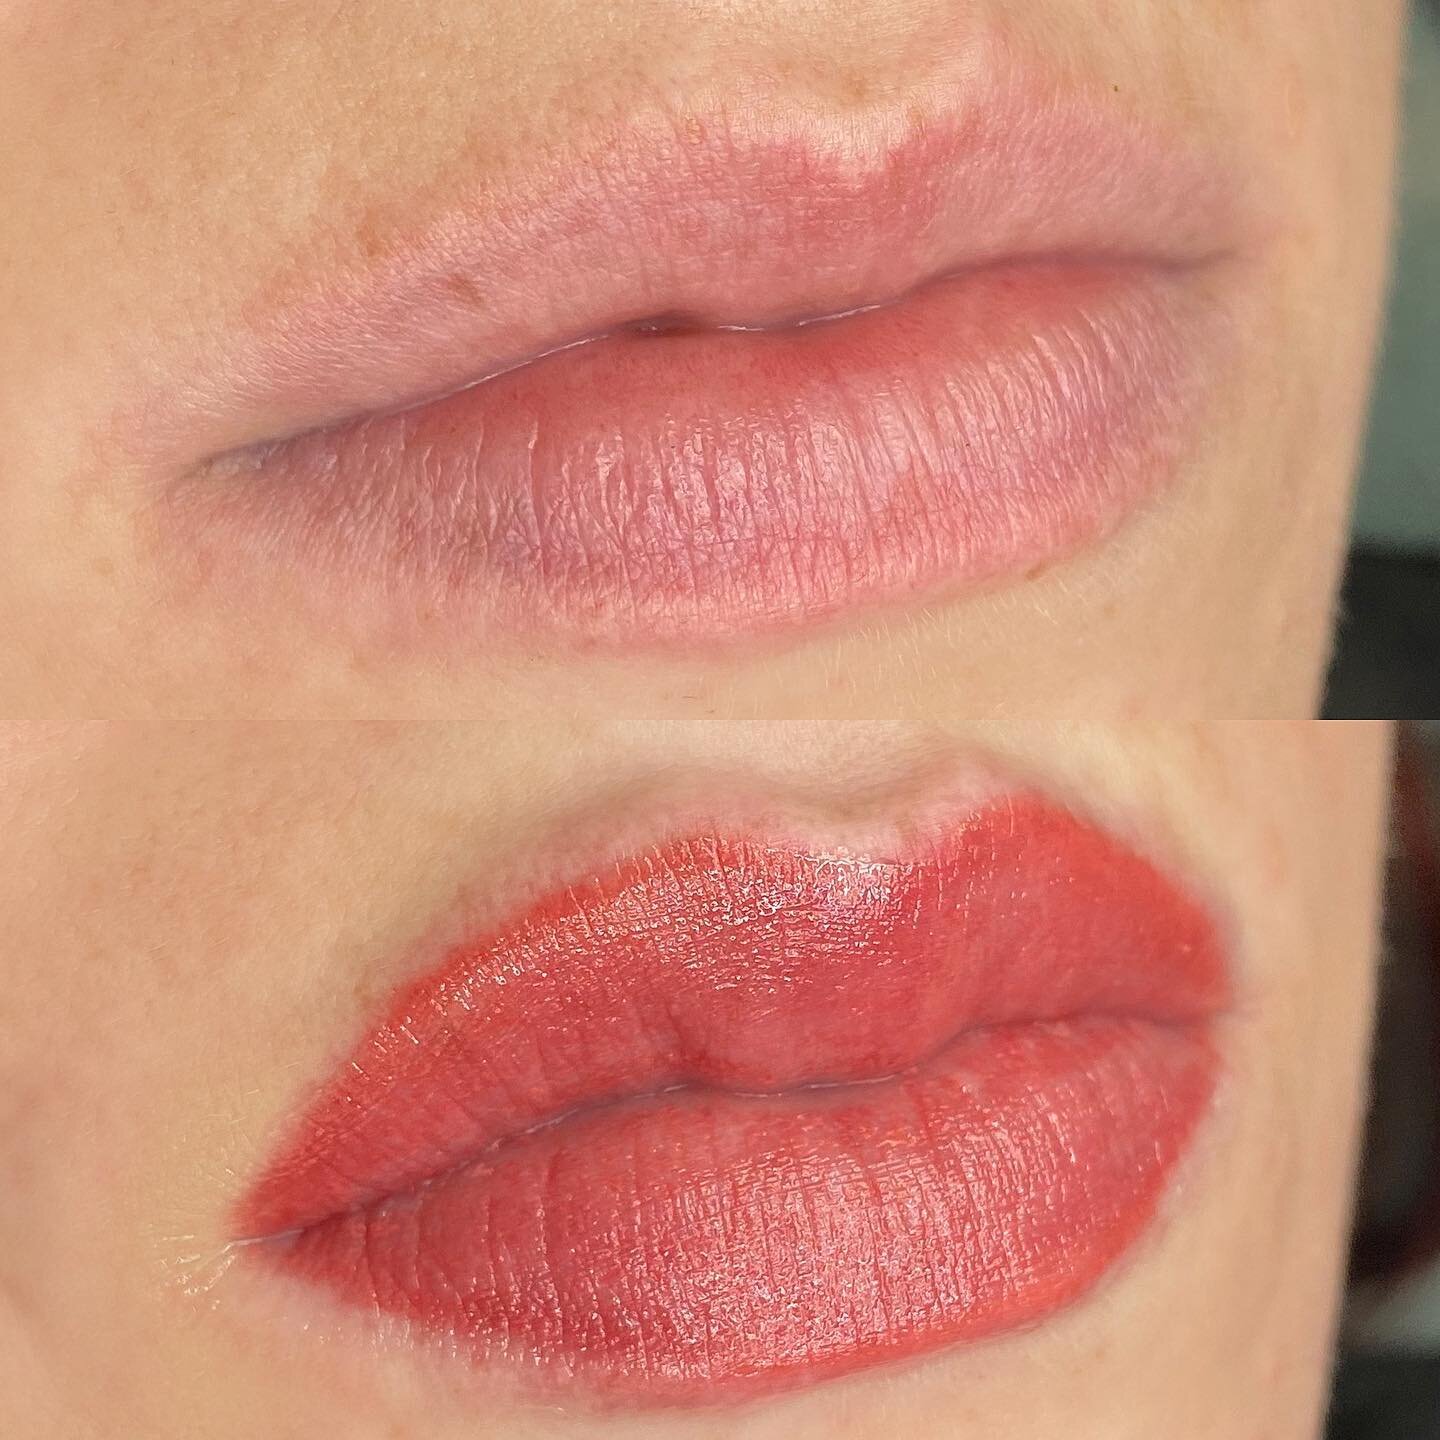 Why hello there new lippies 💋💄 Swelling is normal for the first 2-3 days then will go back to her normal size. The color will soften once healed as well ❤️ If you follow your aftercare of washing 2 times a day and applying Aquaphor on them 24/7 unt